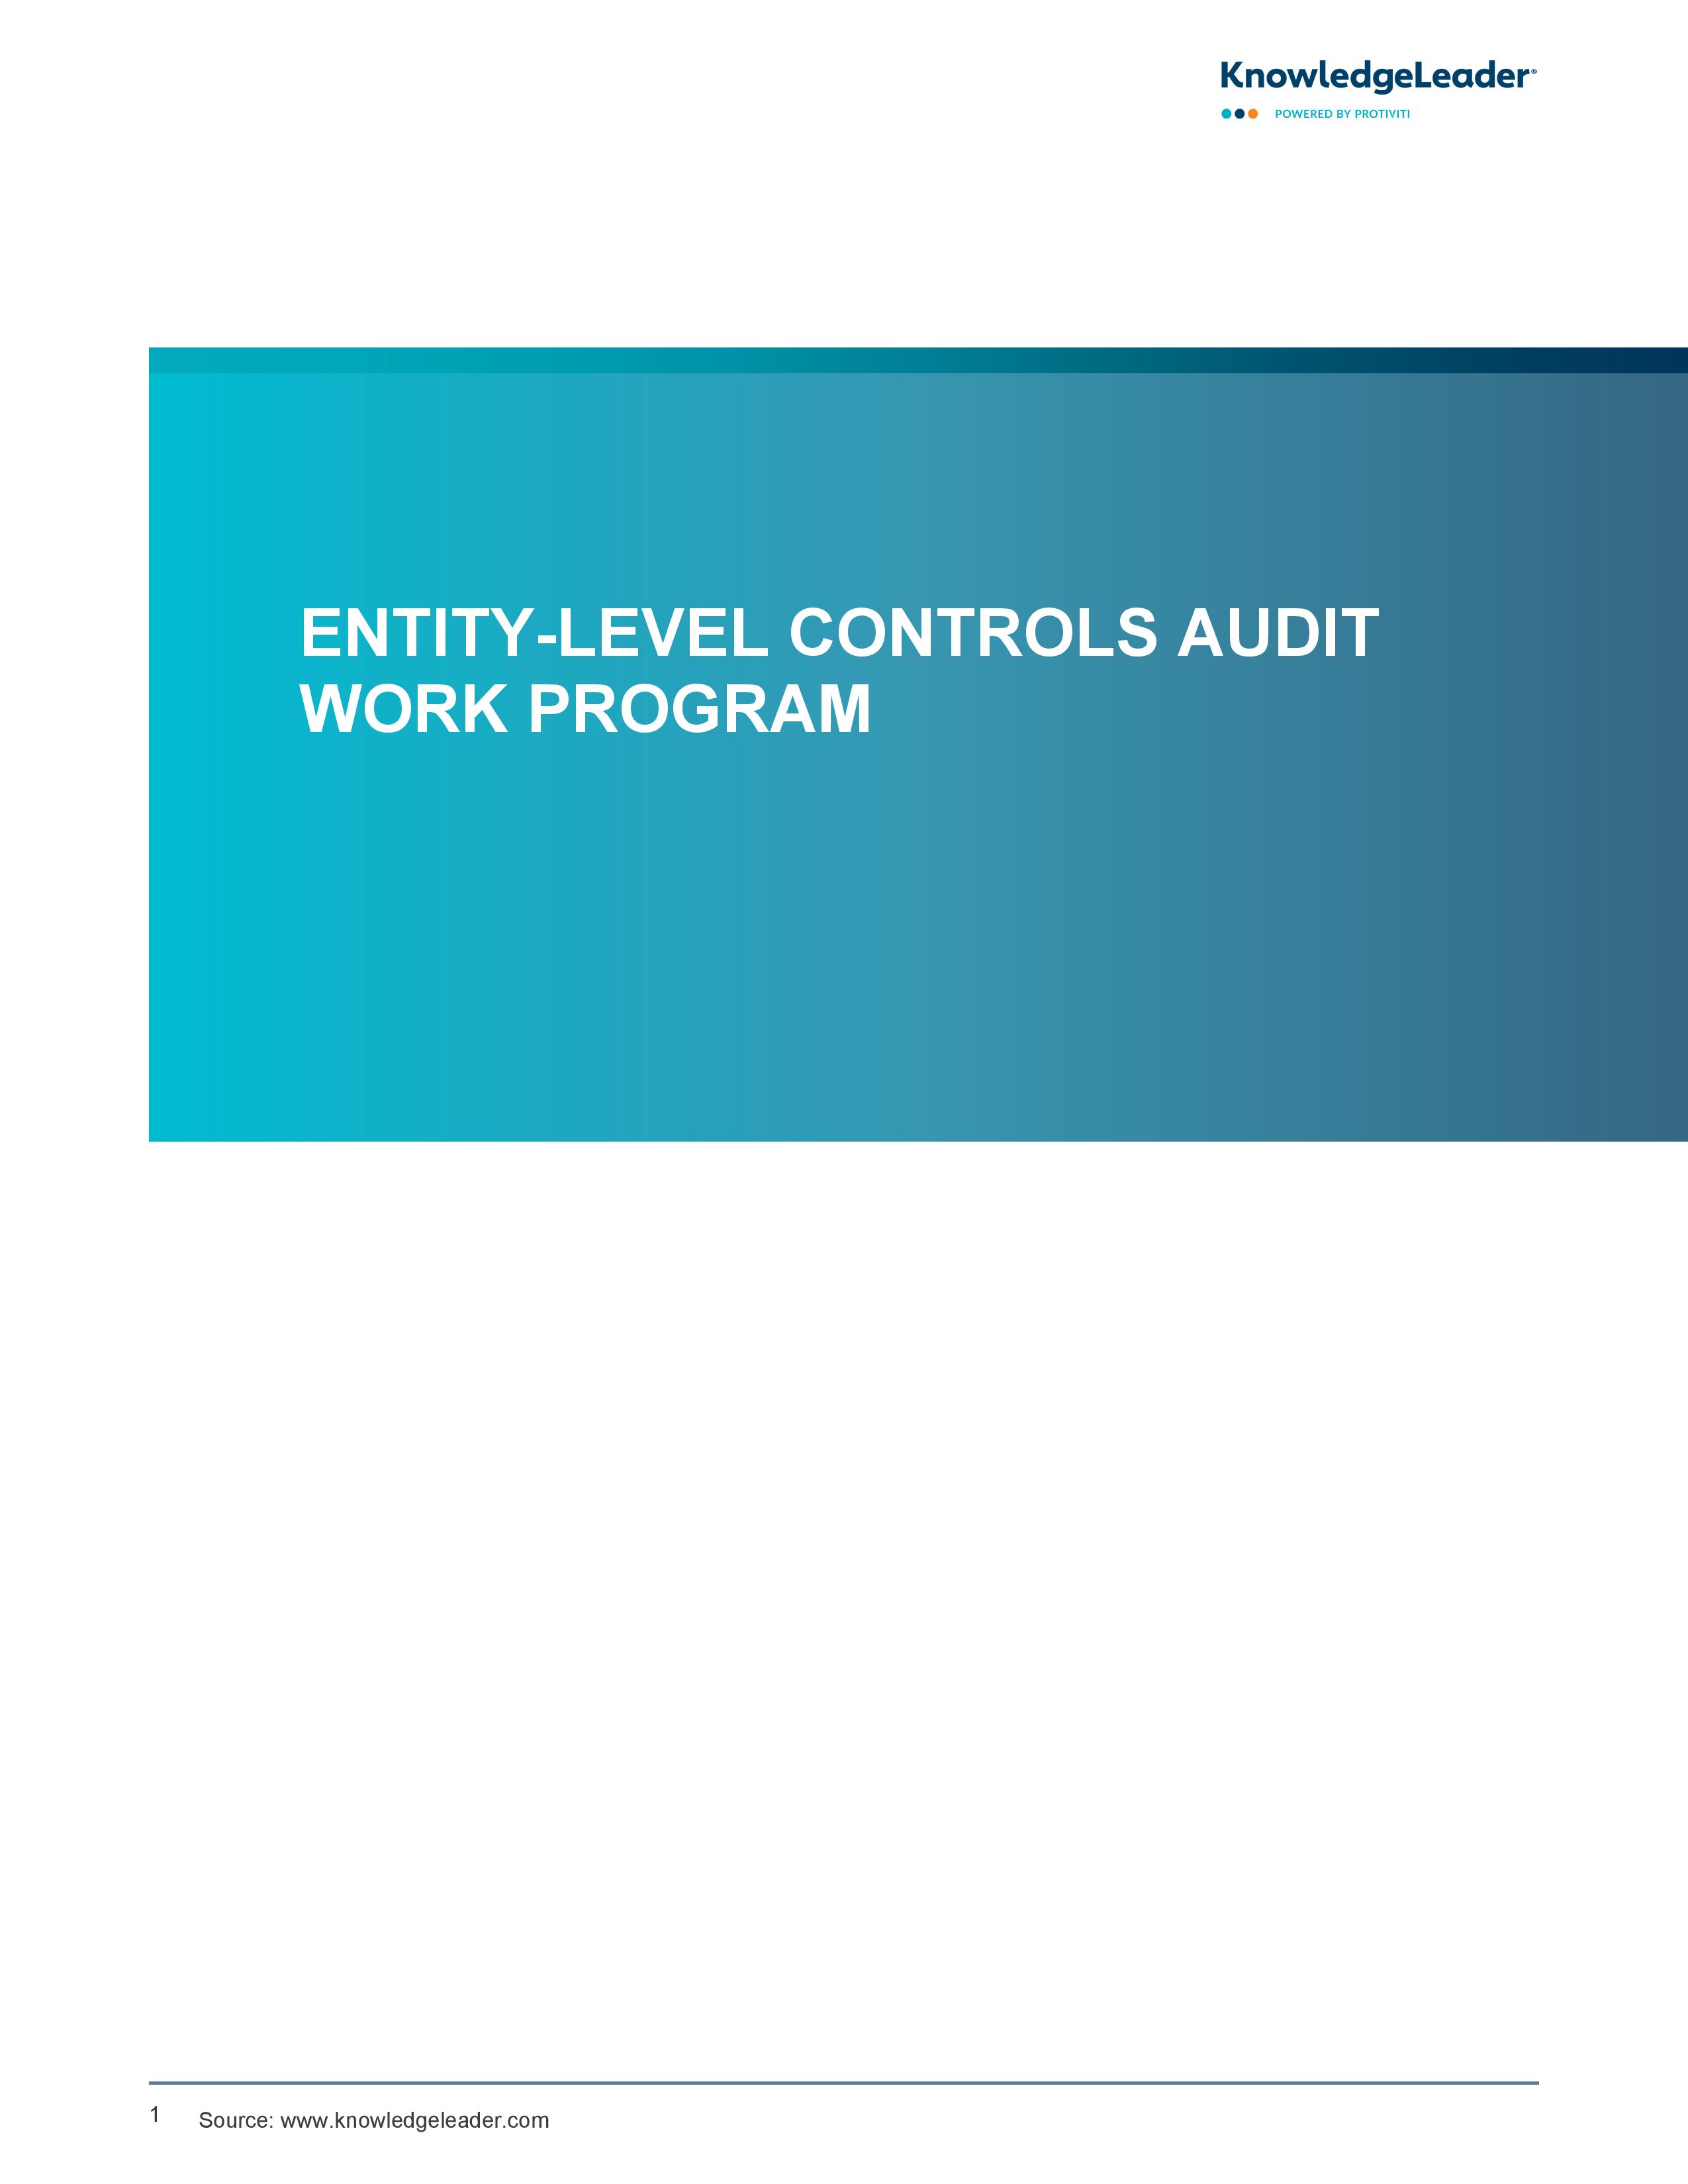 screenshot of the first page of Entity-Level Controls Audit Work Program